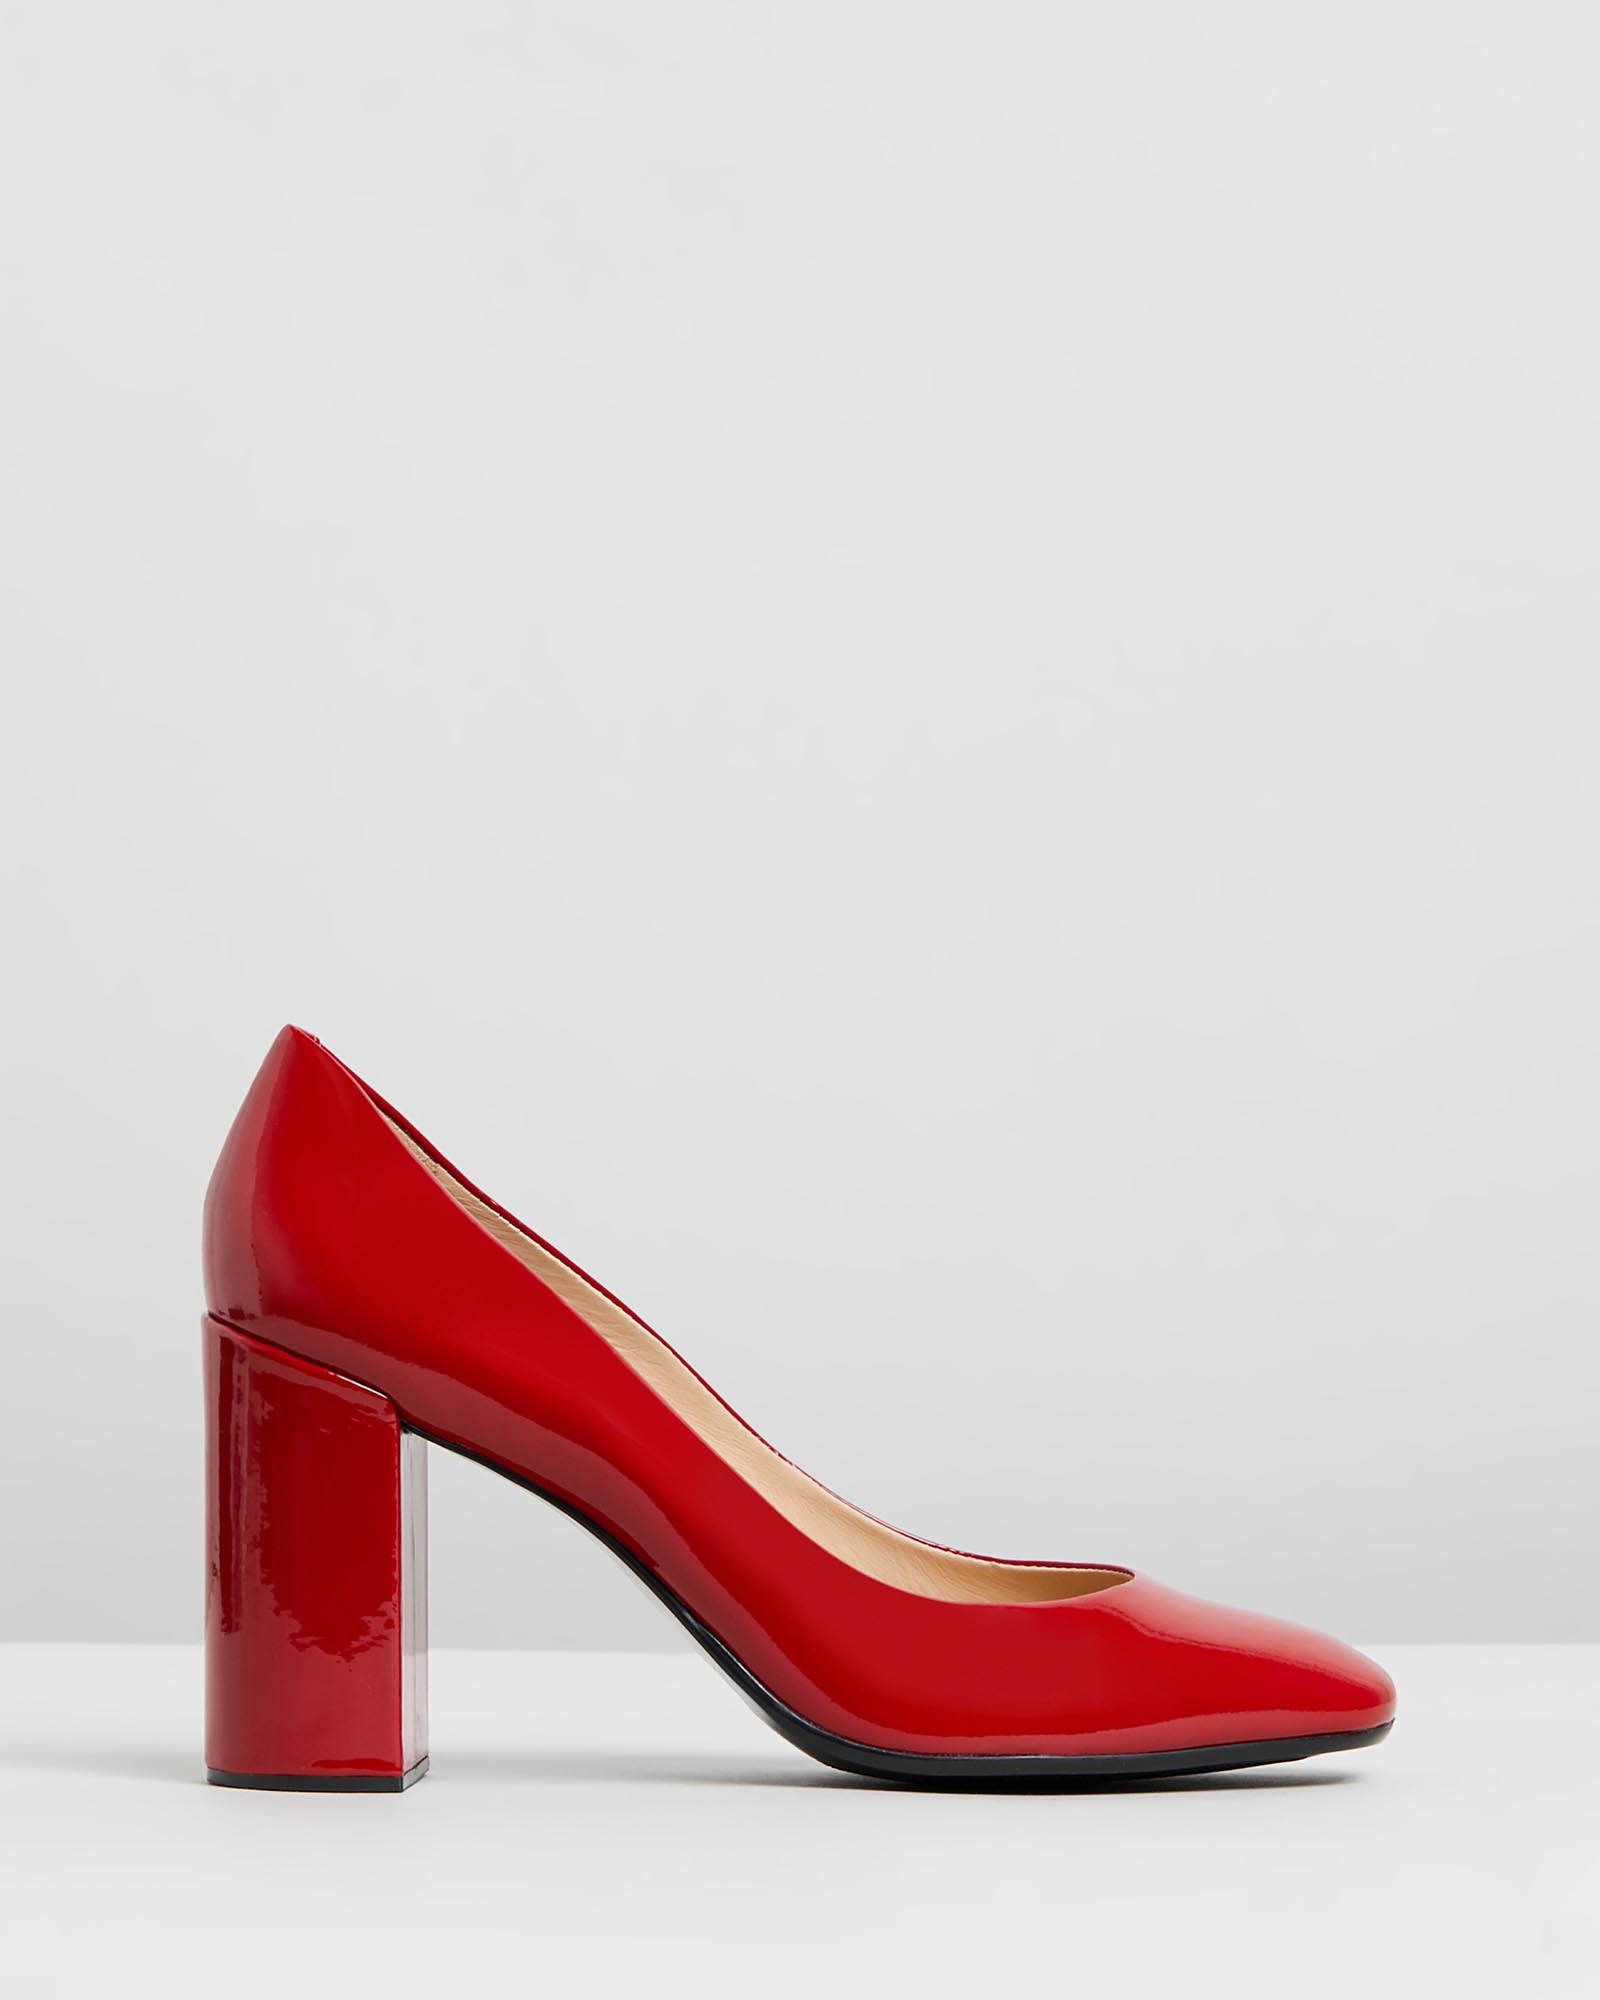 Gladys Red Patent by Nina Armando | ShoeSales